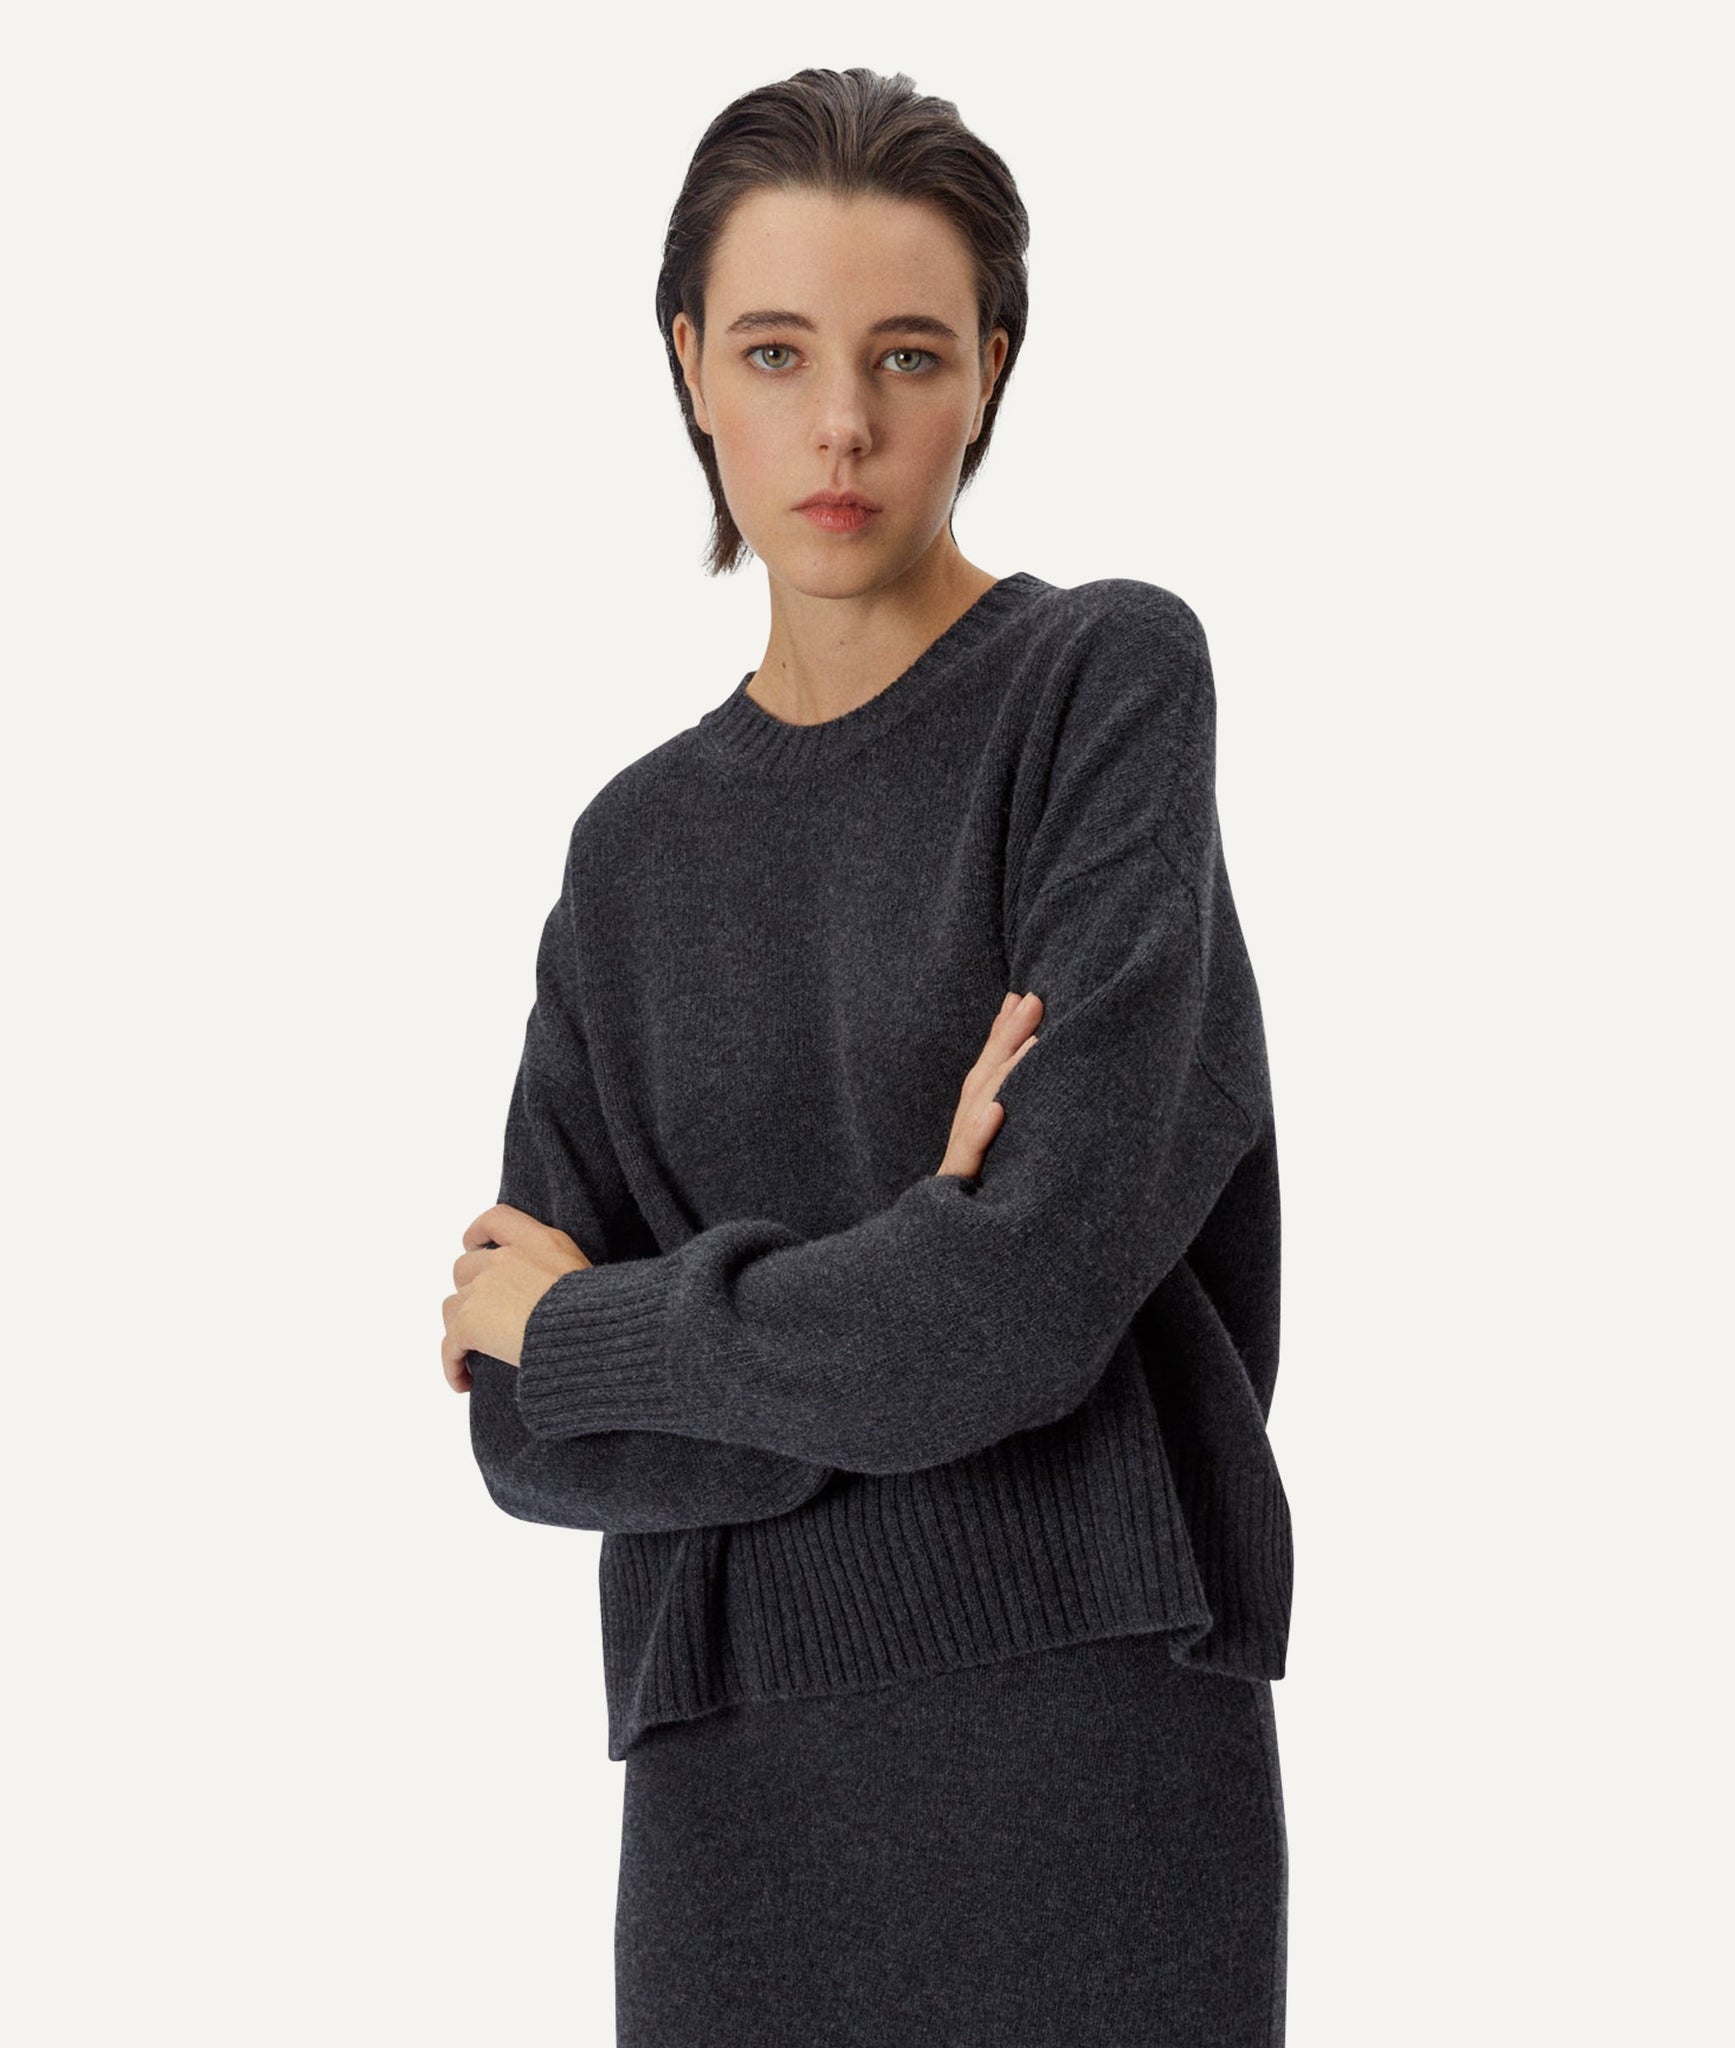 The Woolen Chunky Sweater